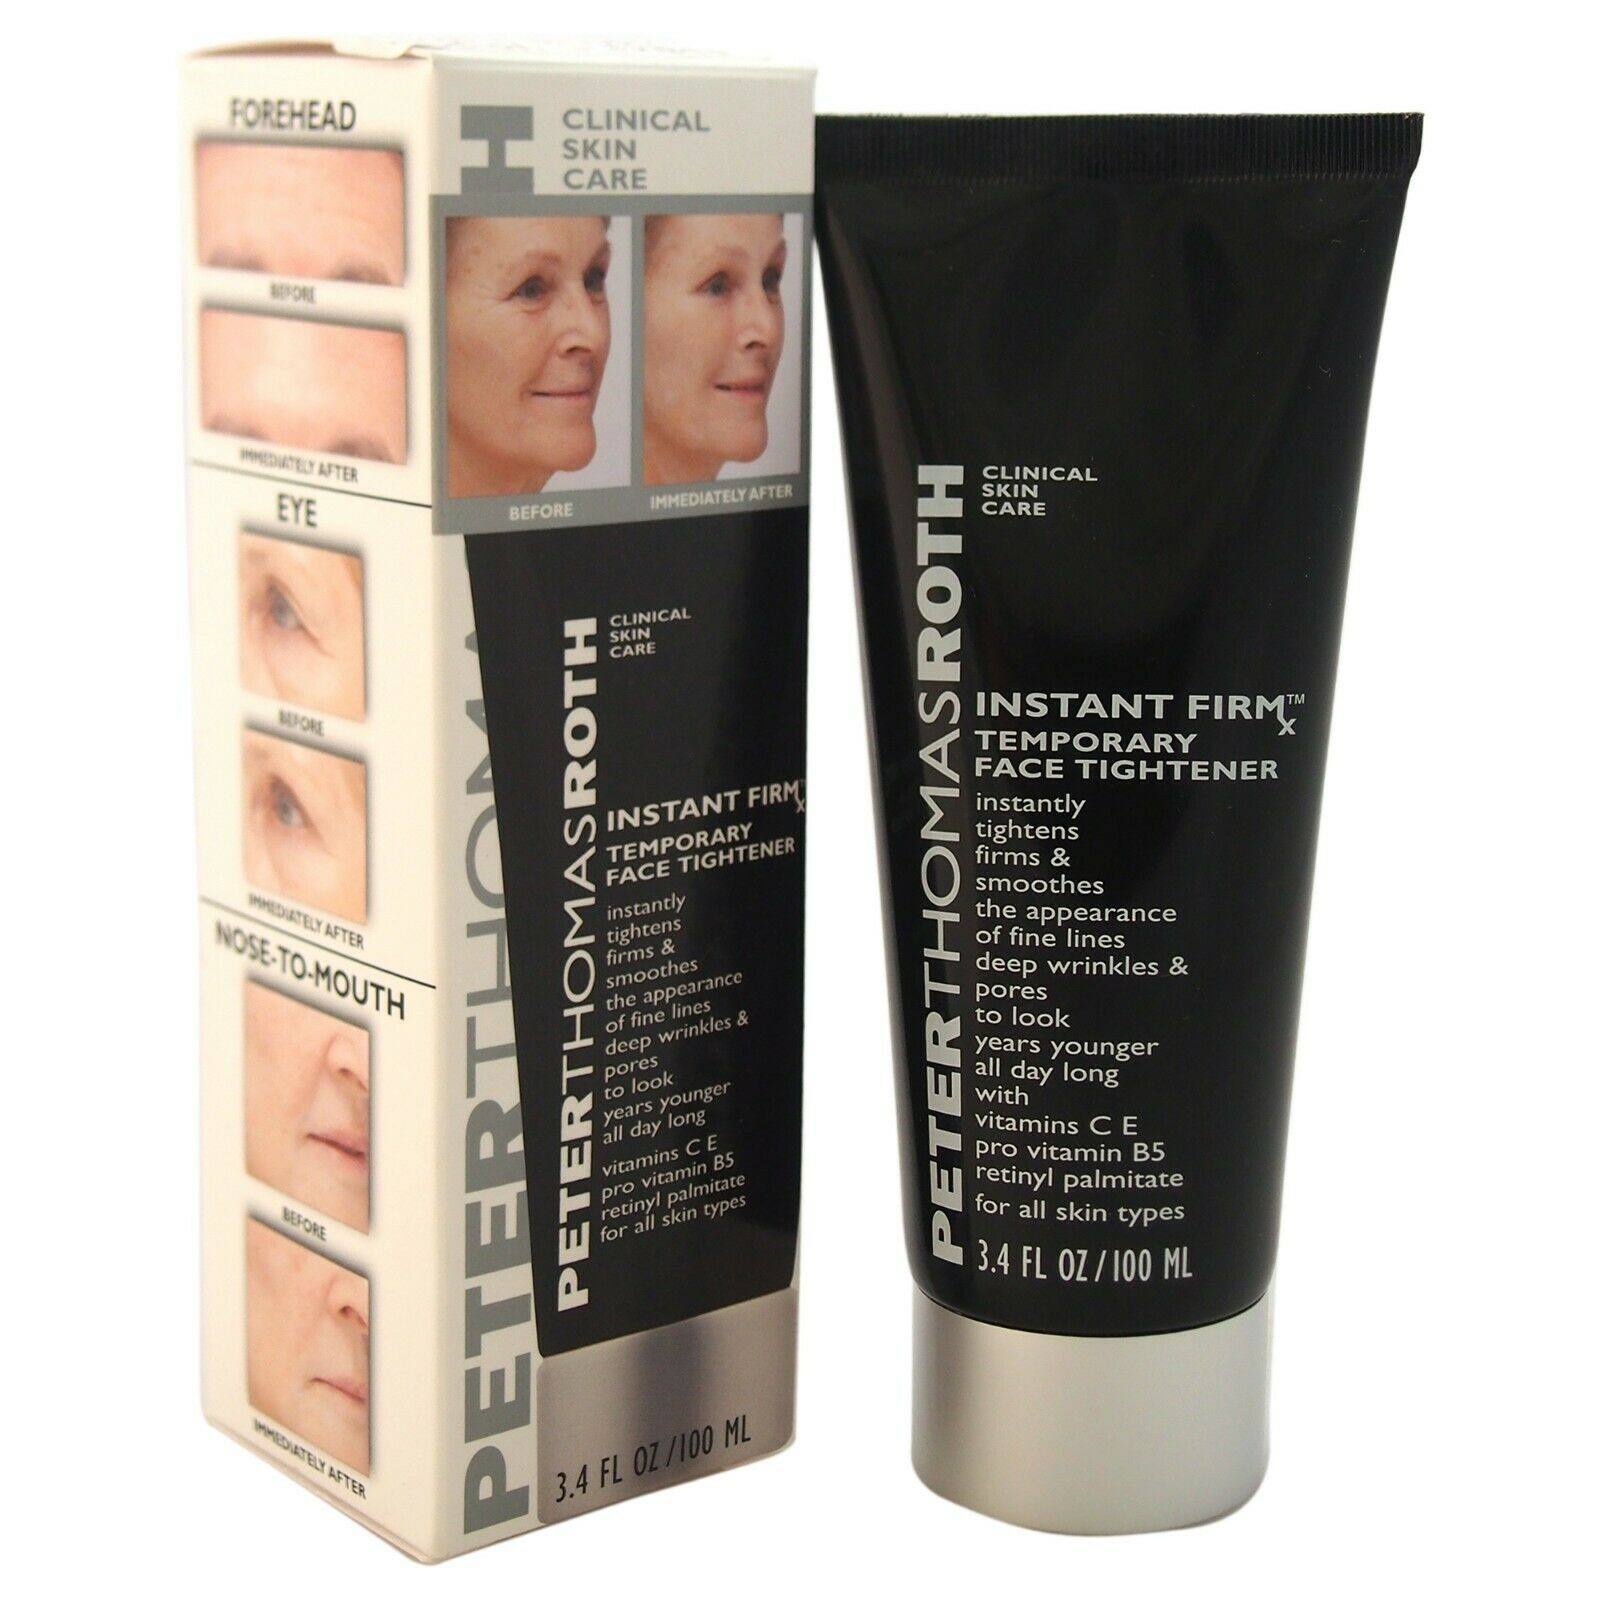 Peter Thomas Roth Instant FirmX 3.4 oz.